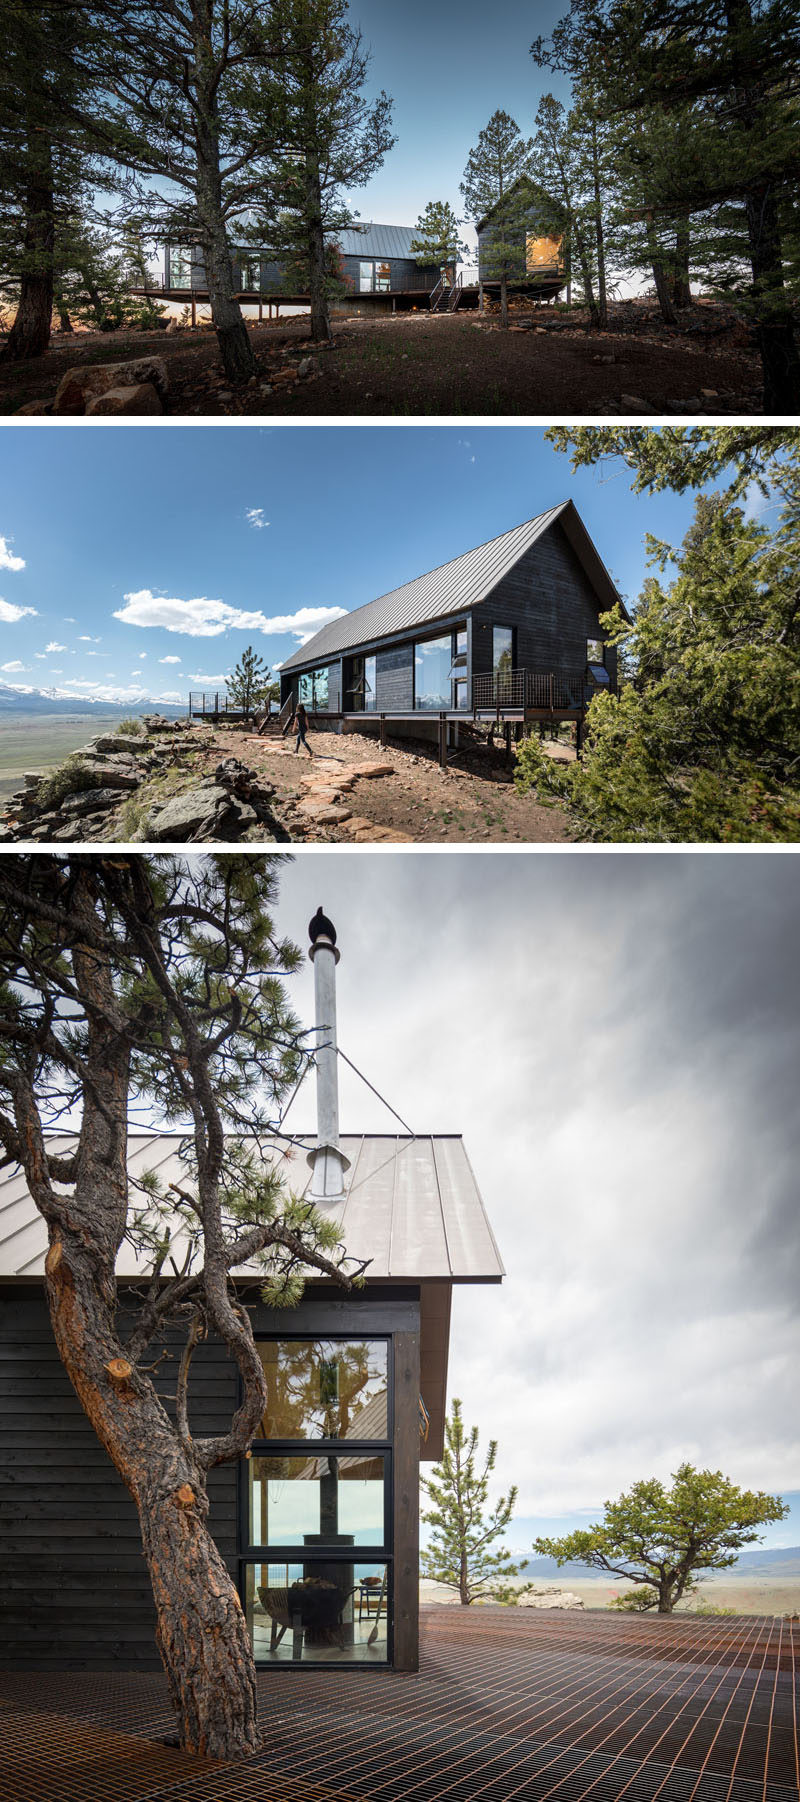 Renée del Gaudio Architecture have designed Big Cabin | Little Cabin in Fairplay, Colorado, that consists of two cabins perched atop a rocky cliff at 10,000 feet. #Architecture #ModernCabin